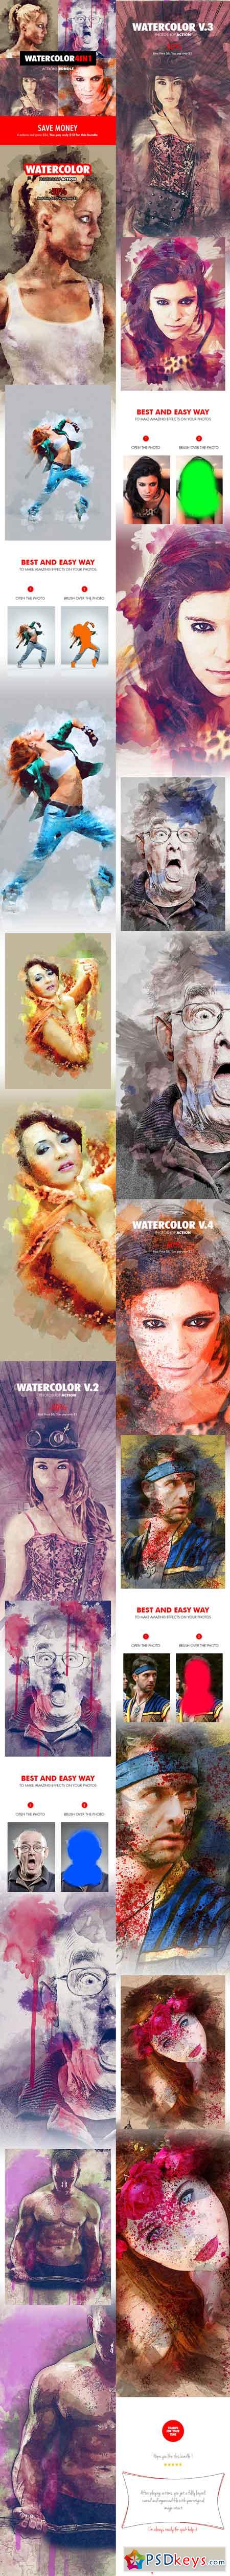 Watercolor - 4in1 Photoshop Actions Bundle V.1 18180095